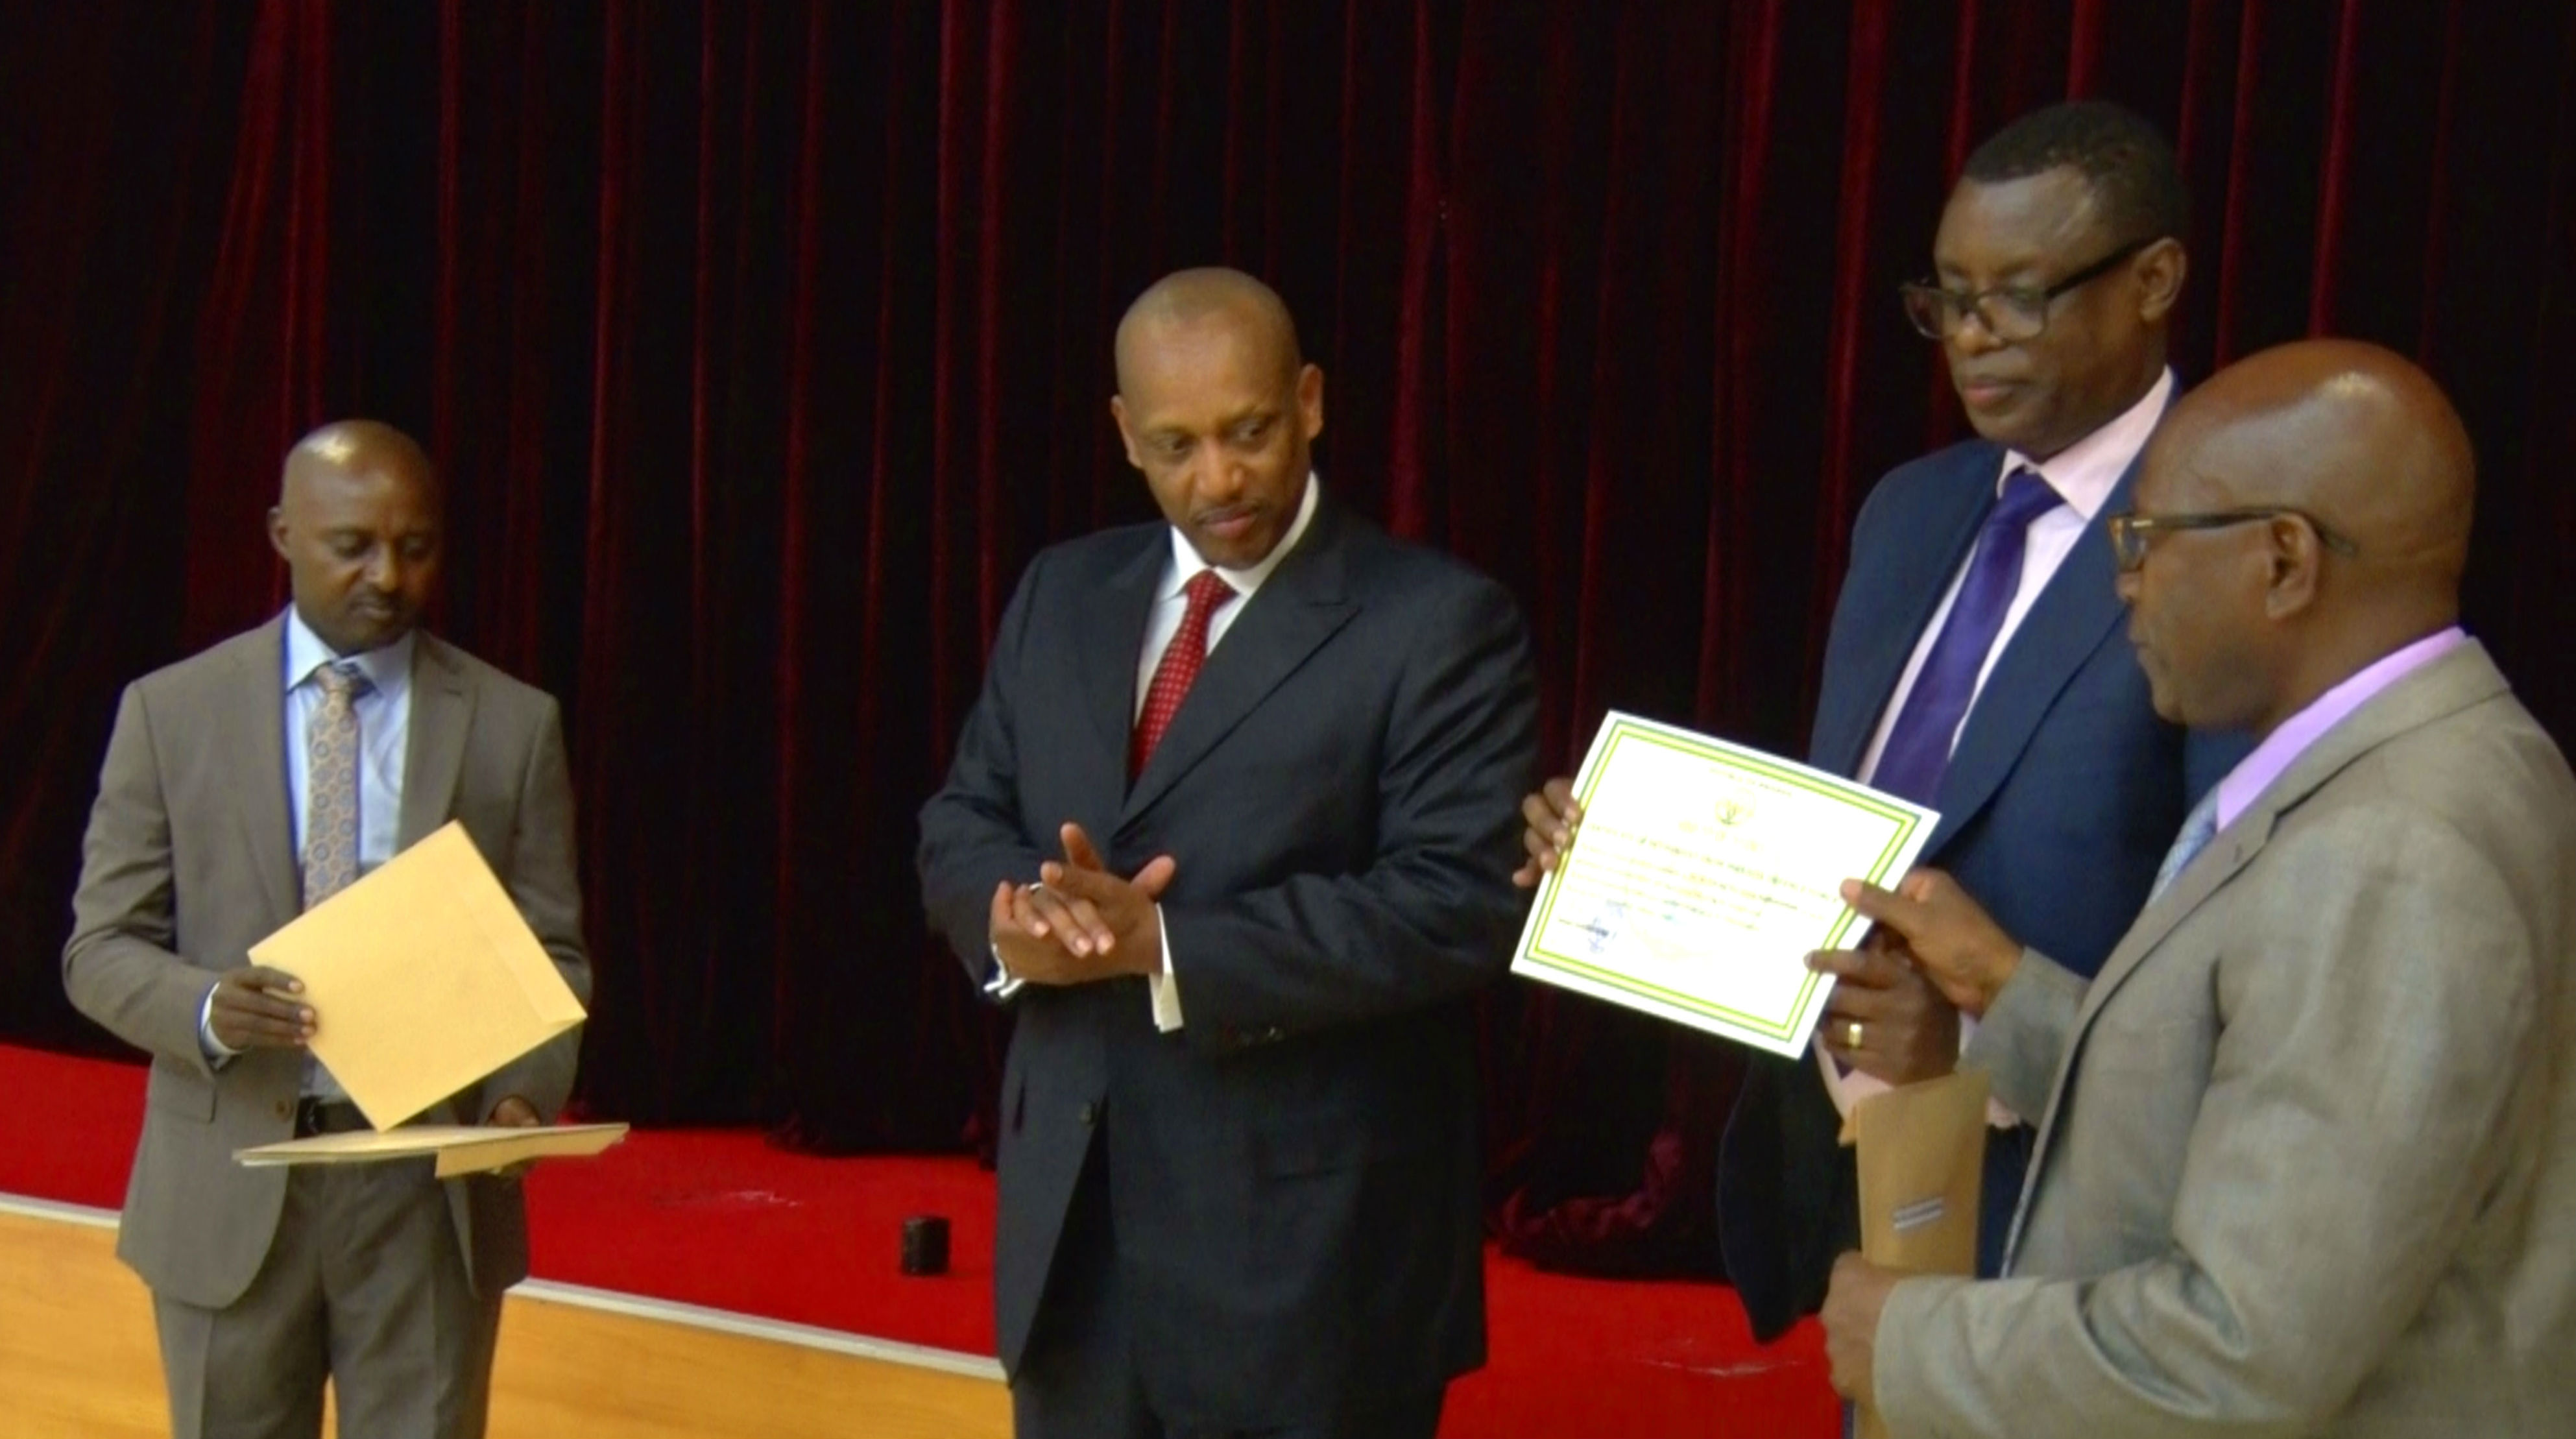 Maj Gen Jerome Ngendahimana (retired), the former RDF Reserve Force Deputy Chief of Staff (R) receives a certificate of retirement from Minister for Defence, Gen. James Kabarebe. Looking on in black suit is Gen. Patrick Nyamvumba, RDF's Chief of Defence Staff while on his right is Lt. Col. Peterson Mutsinzi, RDF's Acting chief of Administration and Personnel.  